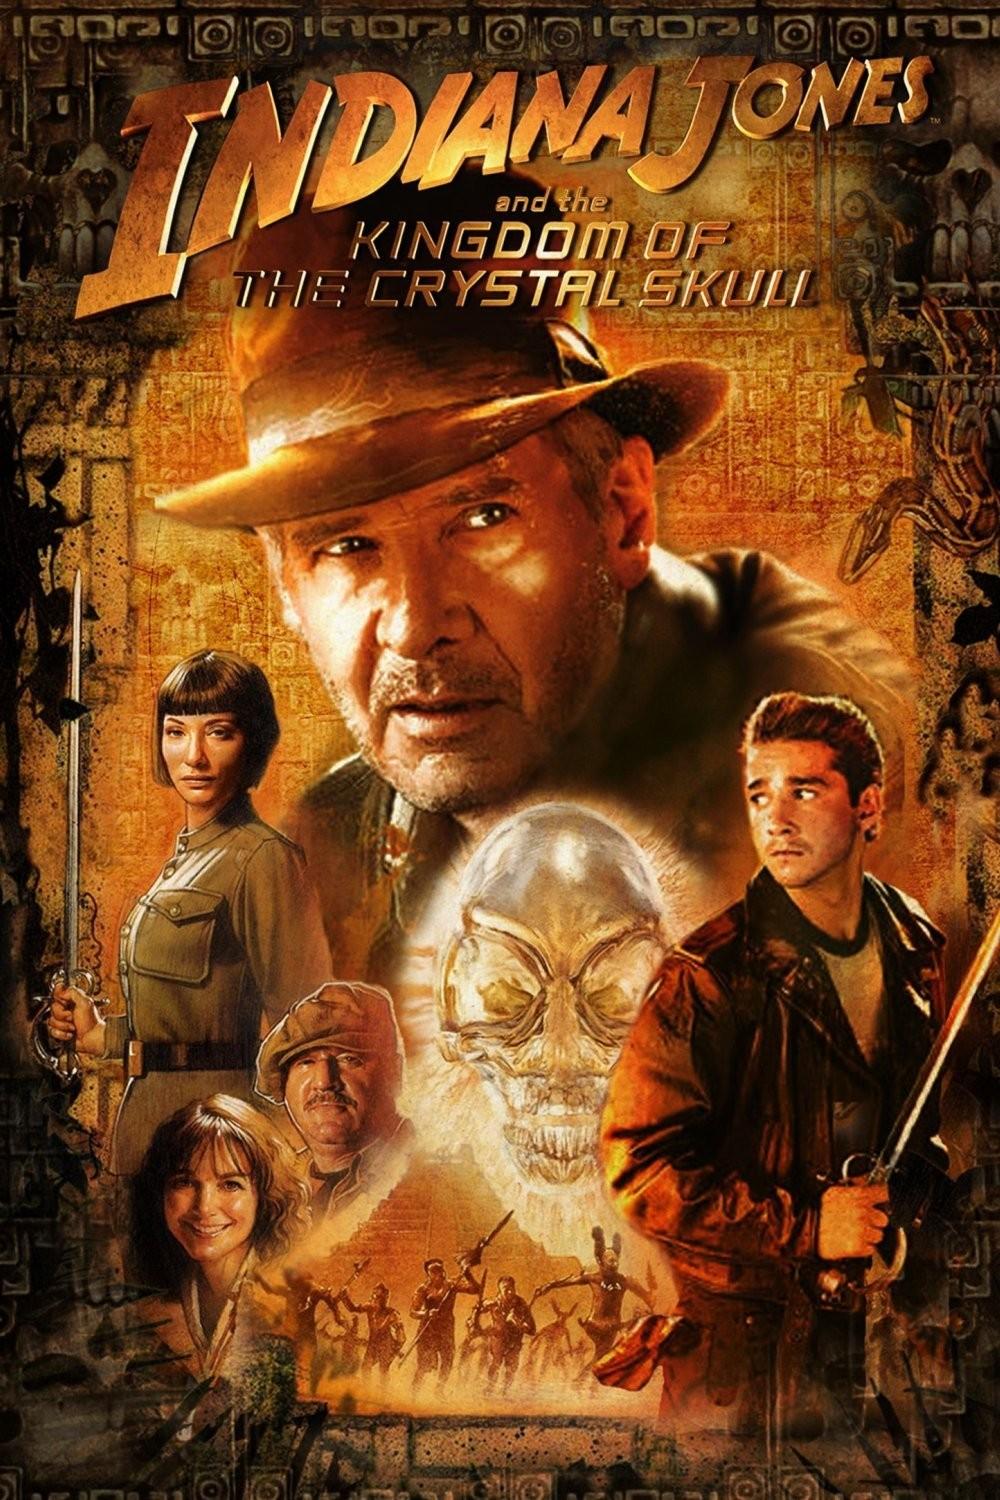 Thoughts on Indiana Jones and the Kingdom of the Crystal Skull (2008)? : r/ indianajones